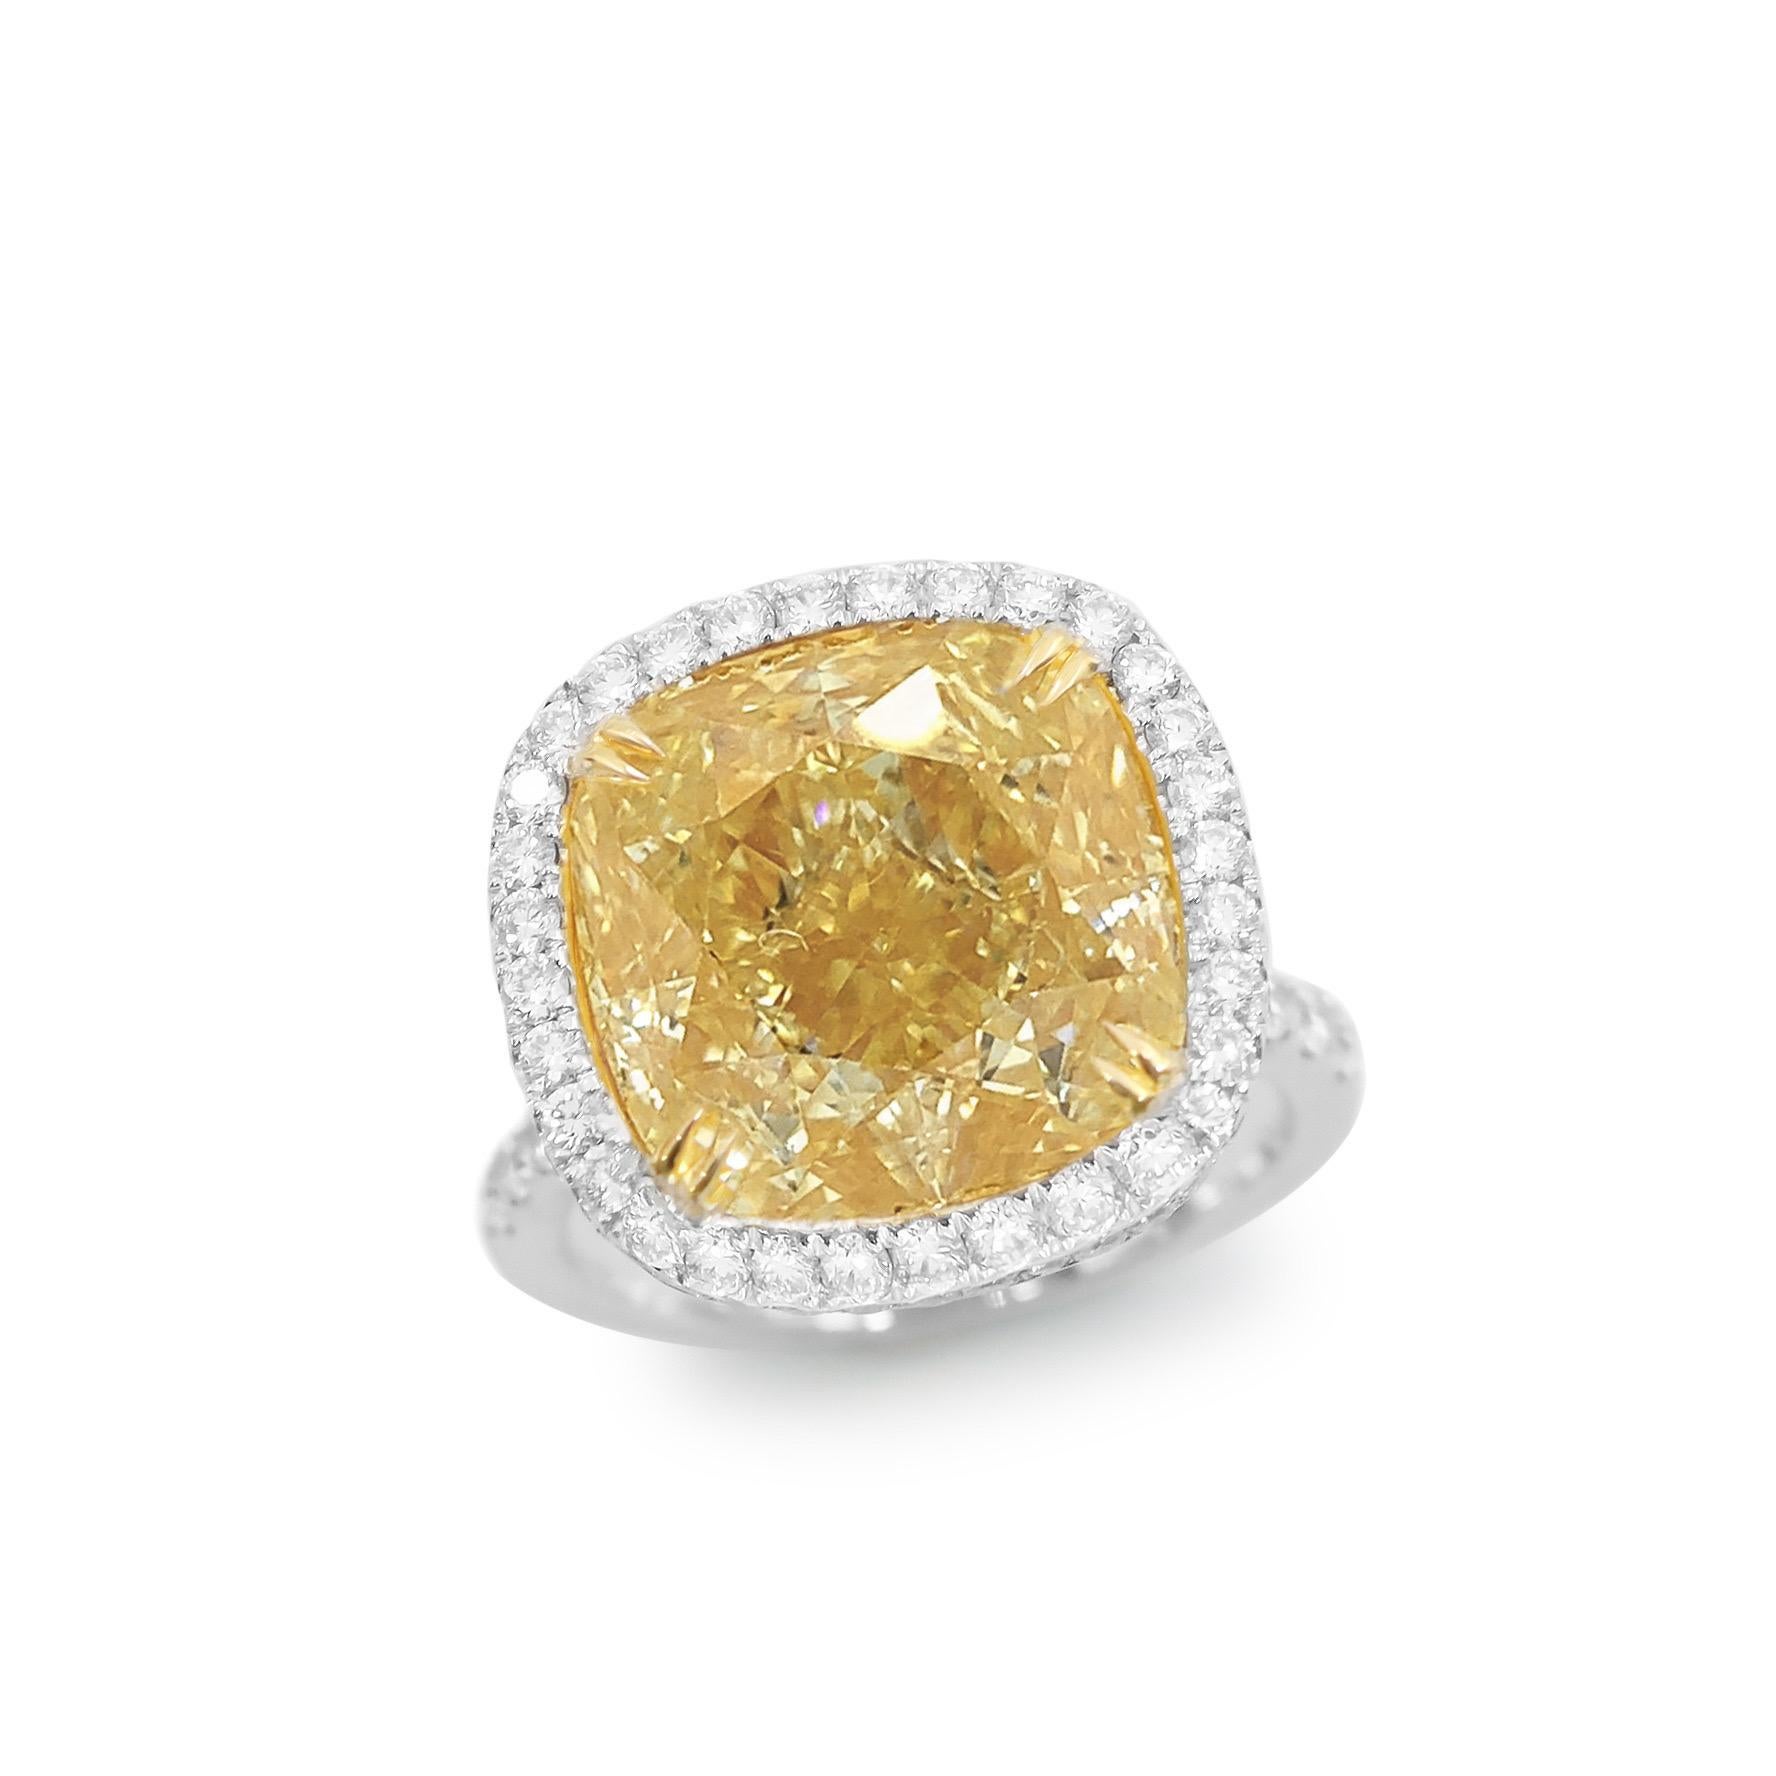 From Emilio Jewelry, a well known and respected wholesaler/dealer located on New York’s iconic Fifth Avenue, 

The focal point of this ring is the magnificent Gia Certified Natural Fancy Yellow Diamond in the center weighing alone over 12ct. After